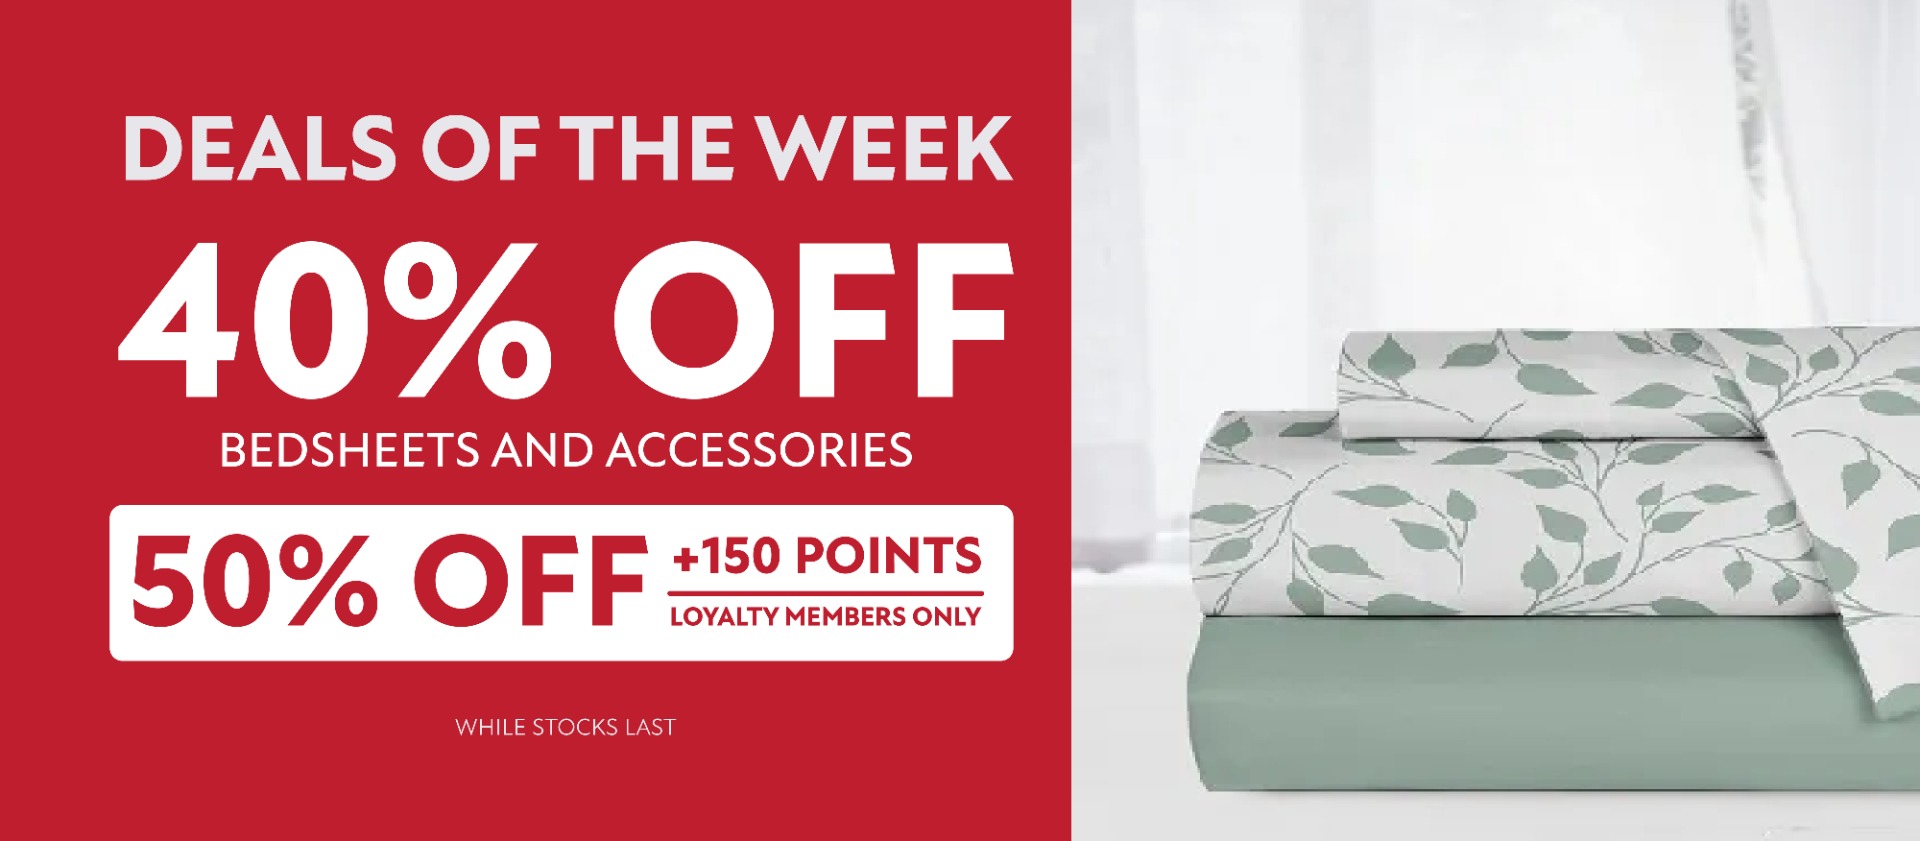 Deals of the Week Linens & Accessories | Excellent Stores Limited | Trinidad